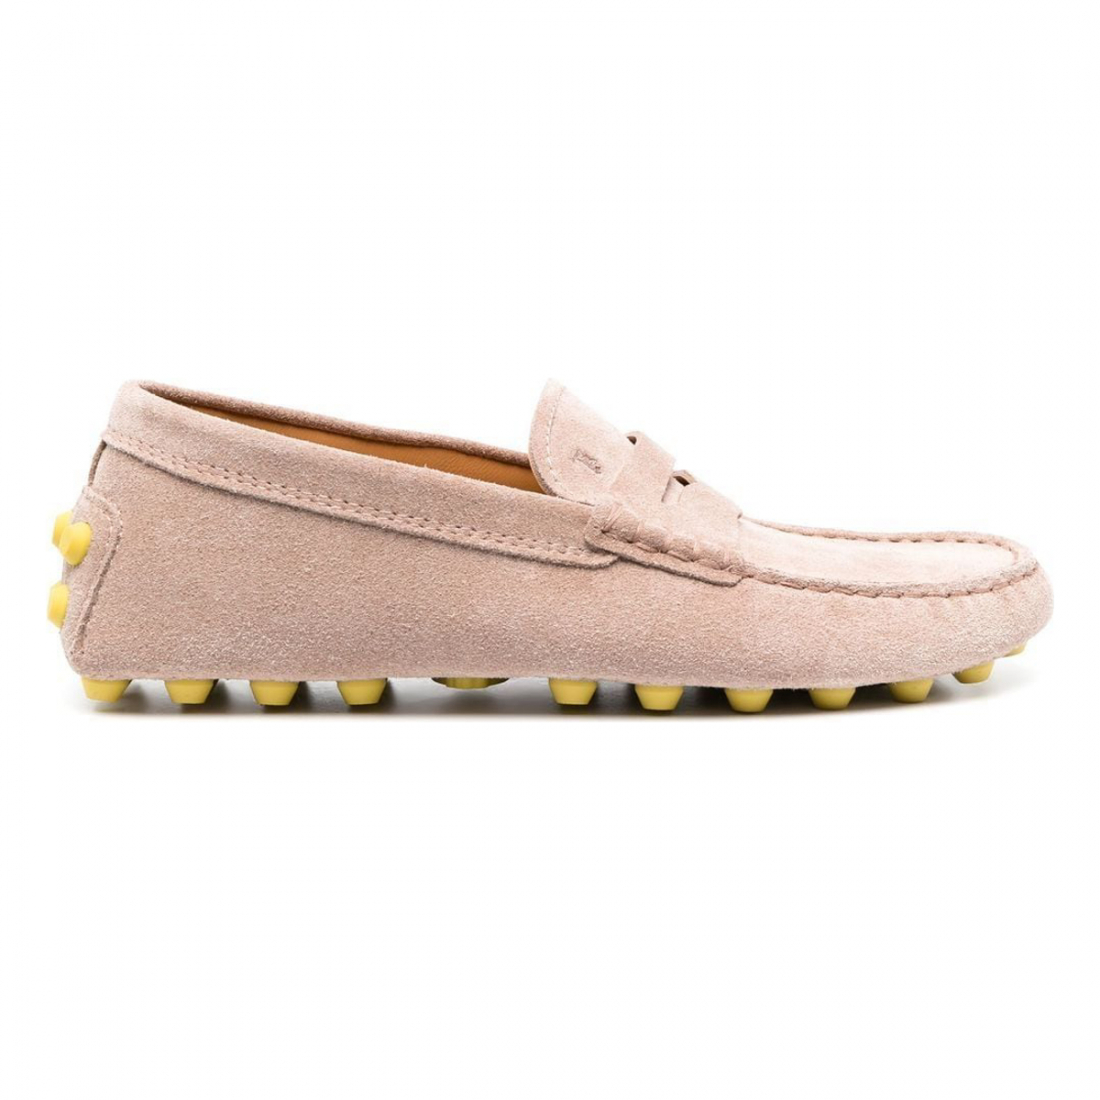 Women's 'Gommino' Loafers